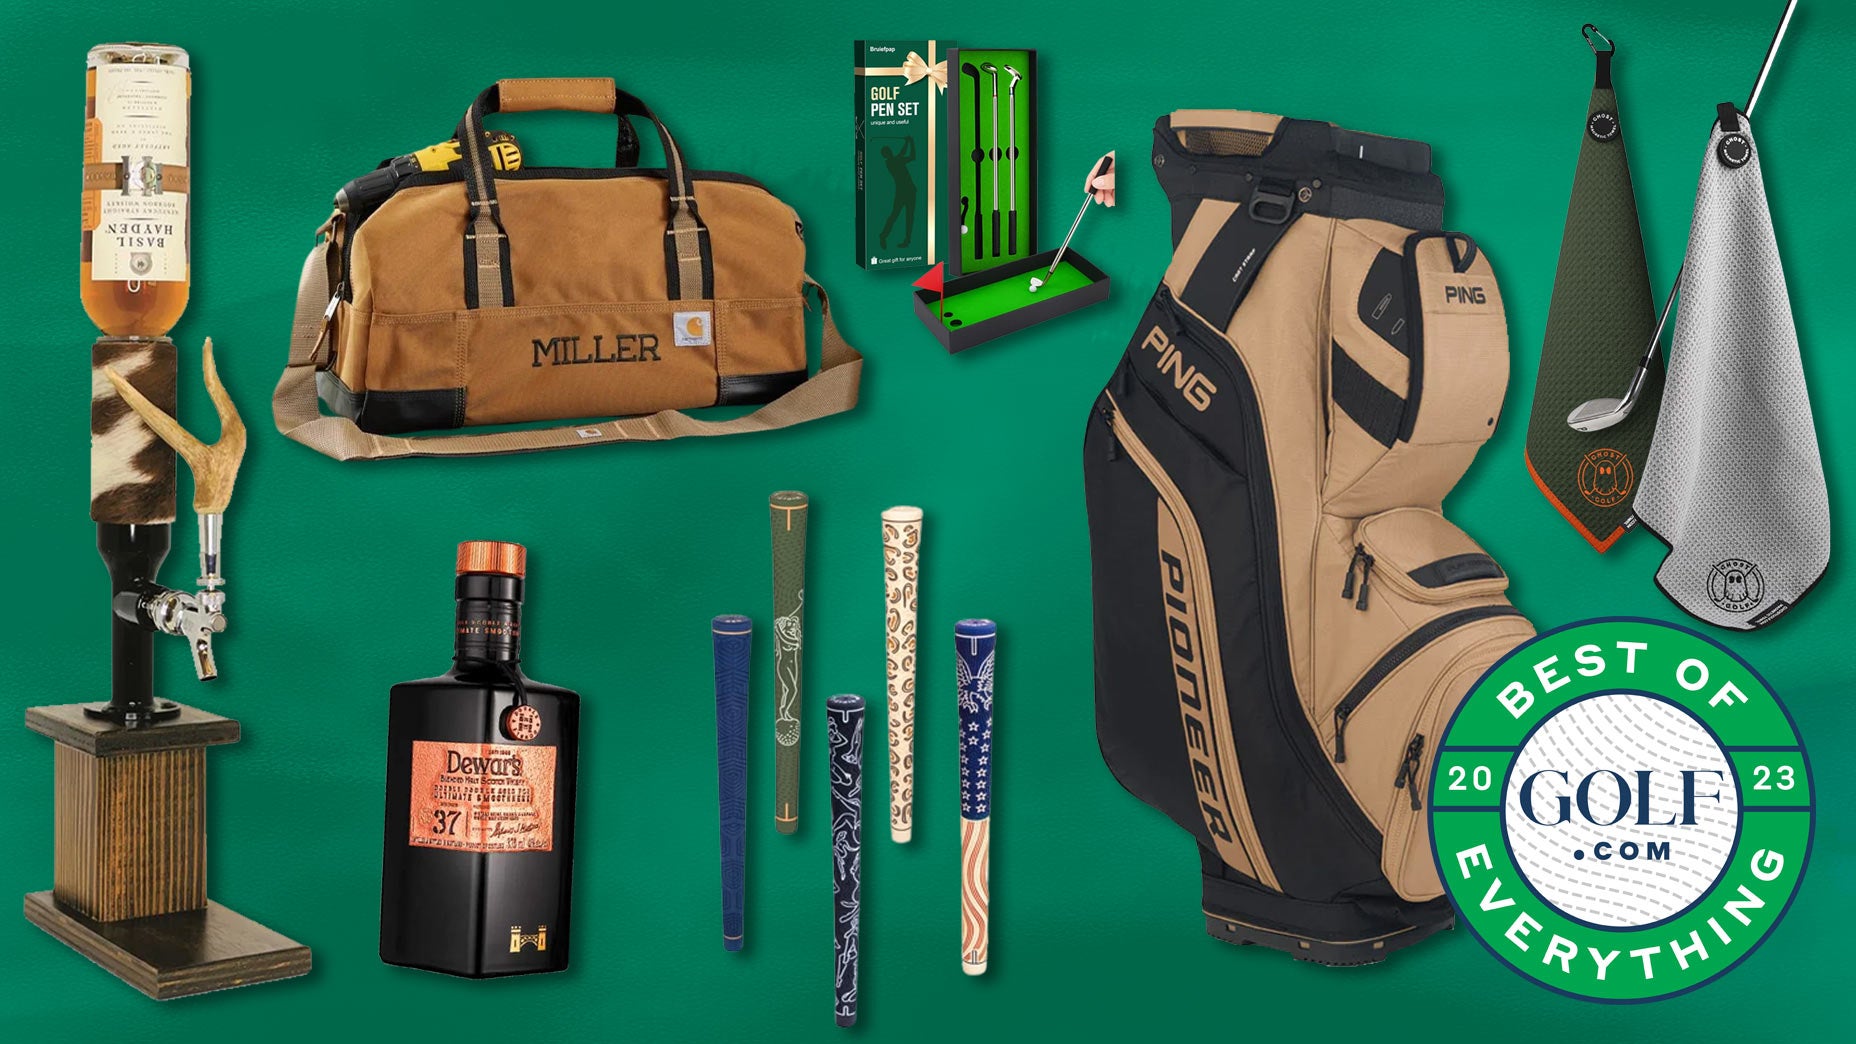 Last-minute golf gifts for busy gift-givers: Our Picks